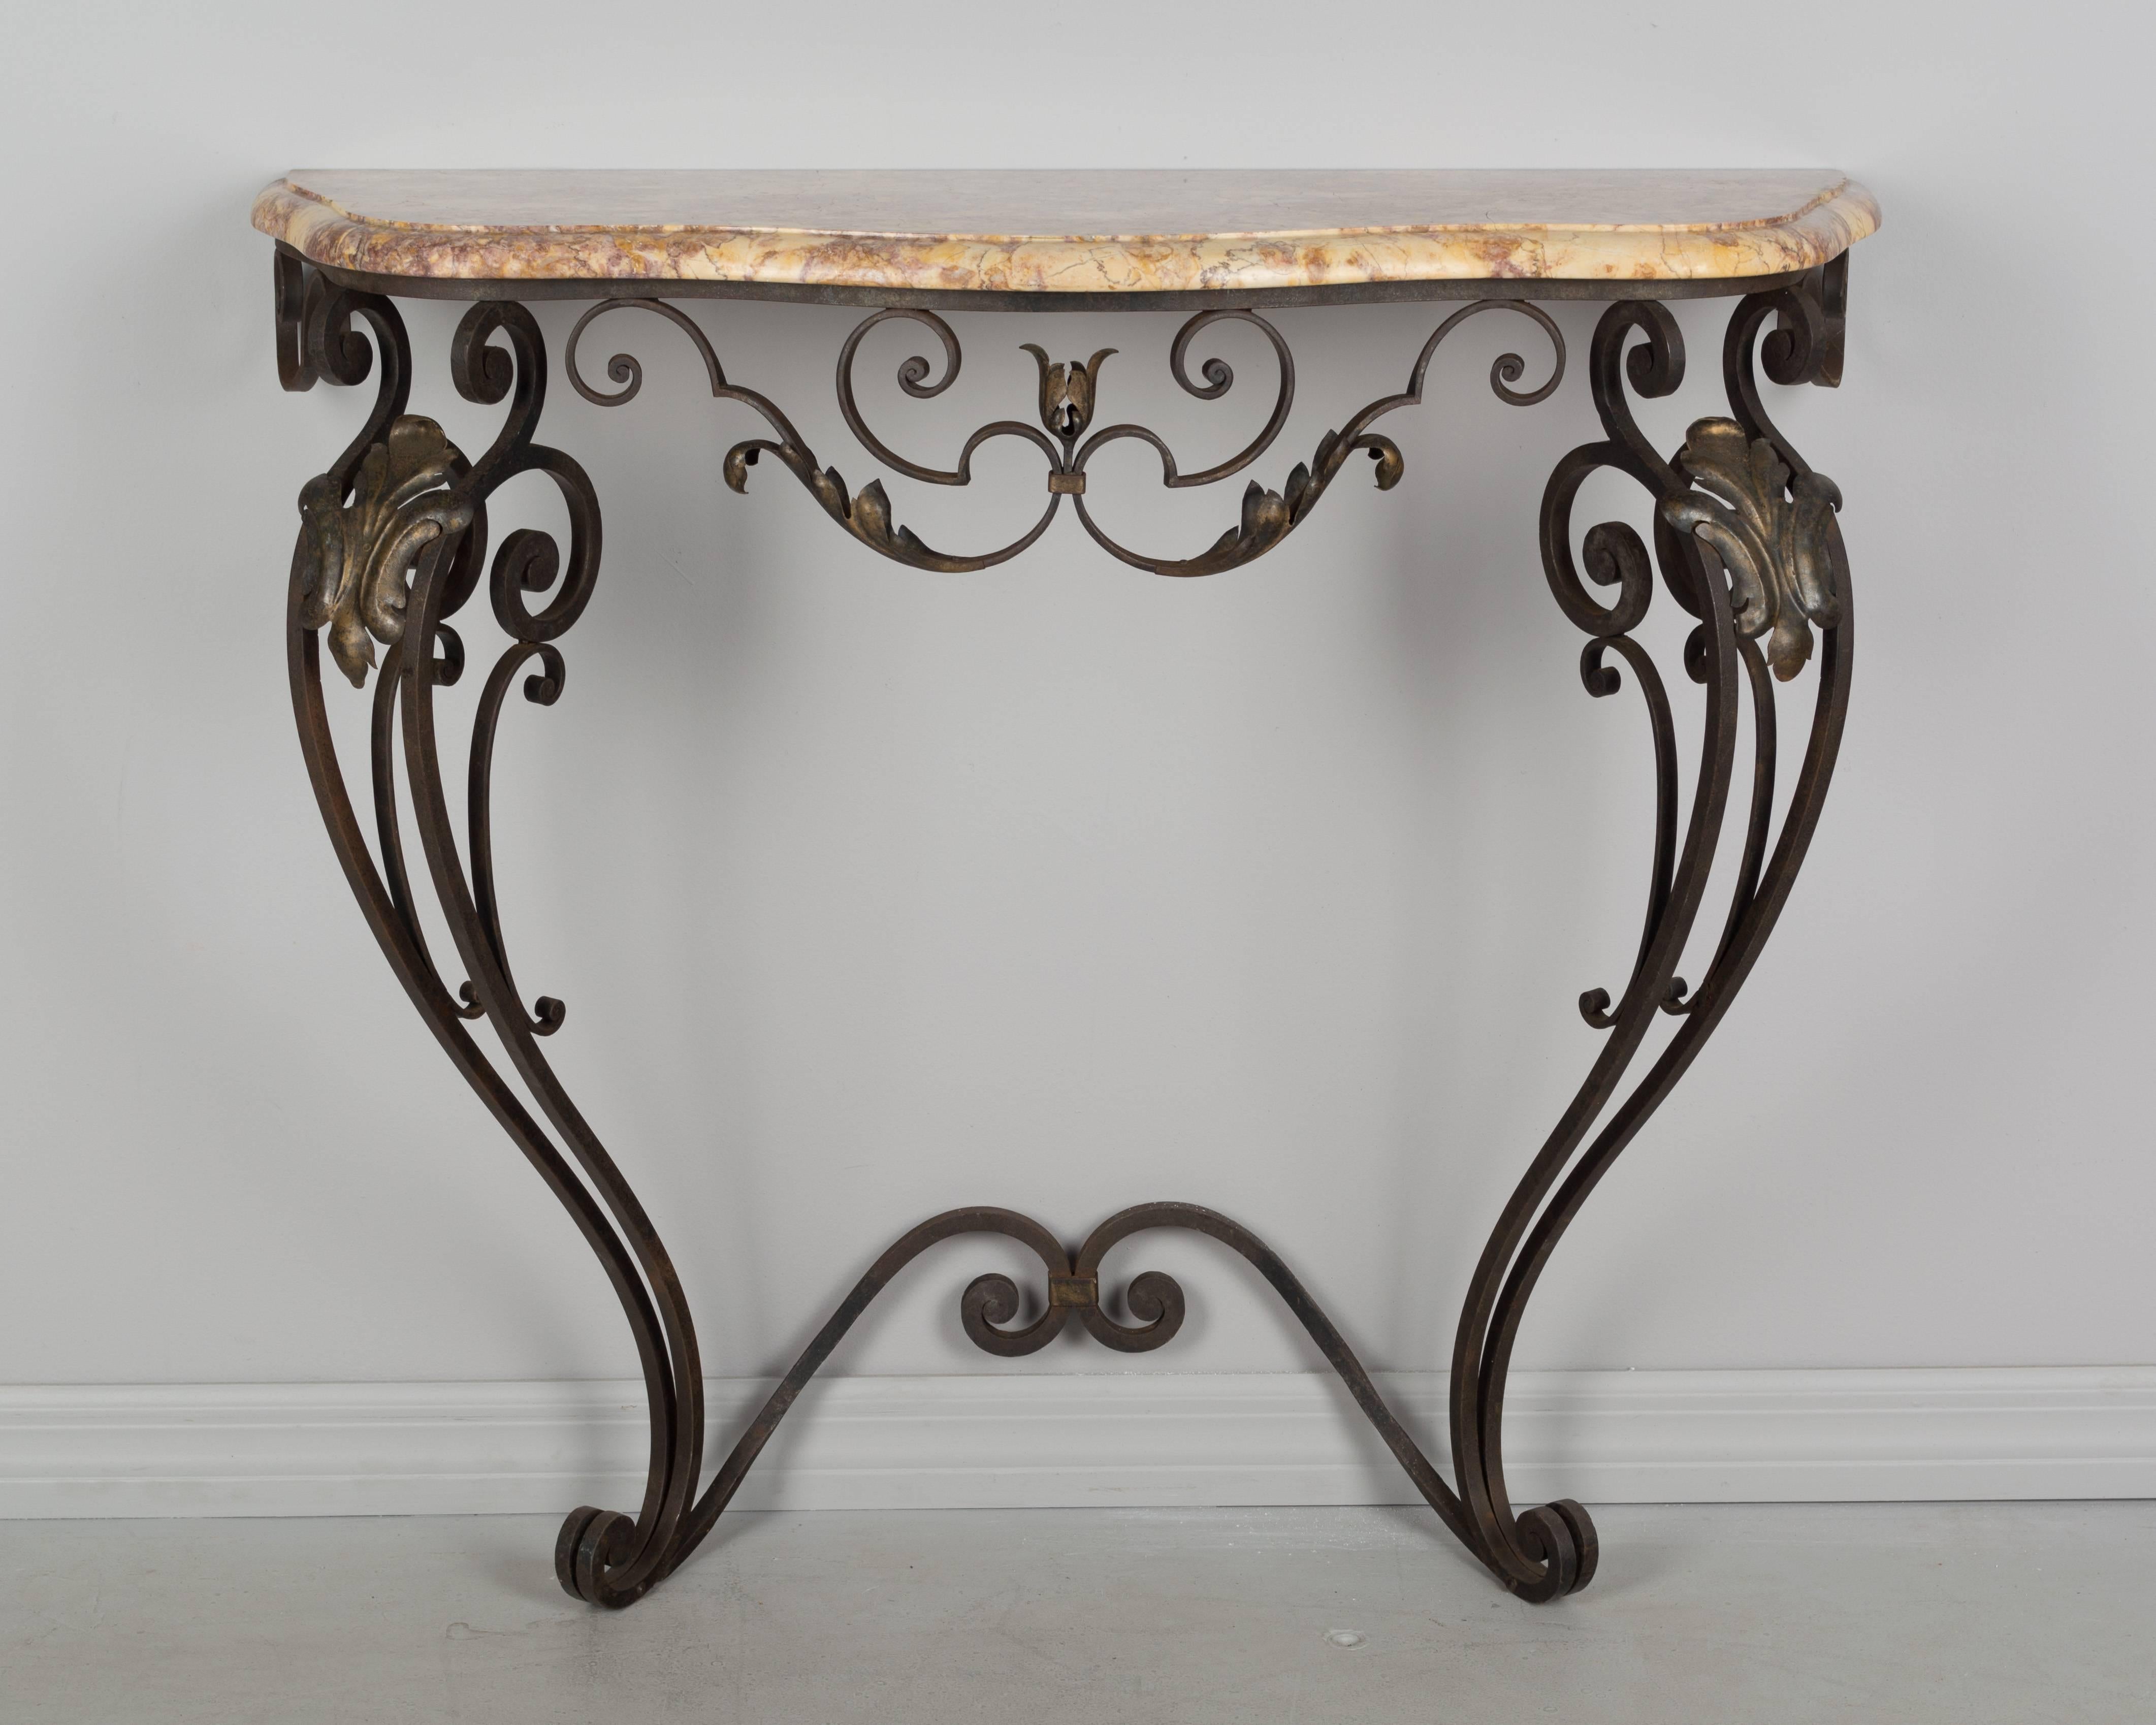 A French Louis XV style wrought iron console table. Decorated with gilt tole acanthus leaves. Original one inch thick marble top.
More photos available upon request. We have a large selection of French antiques. Please visit our showroom in Winter